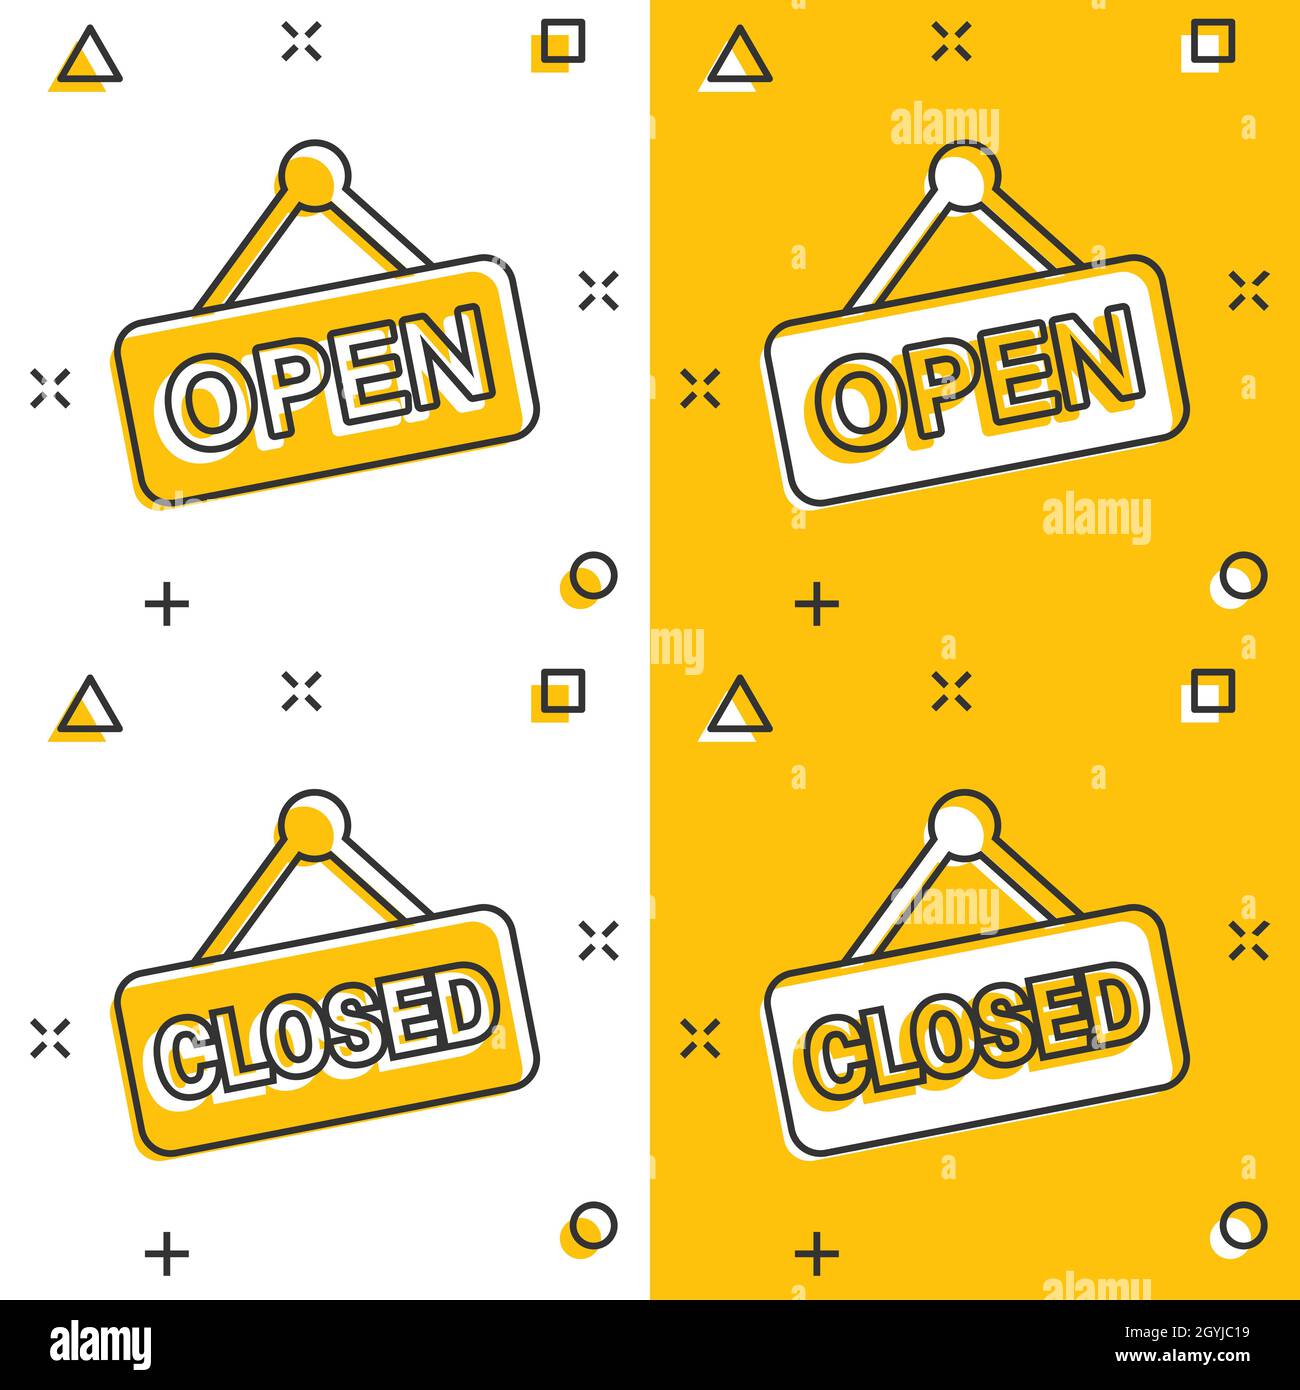 Open, closed sign icon in comic style. Accessibility cartoon vector illustration on white isolated background. Message splash effect business concept. Stock Vector